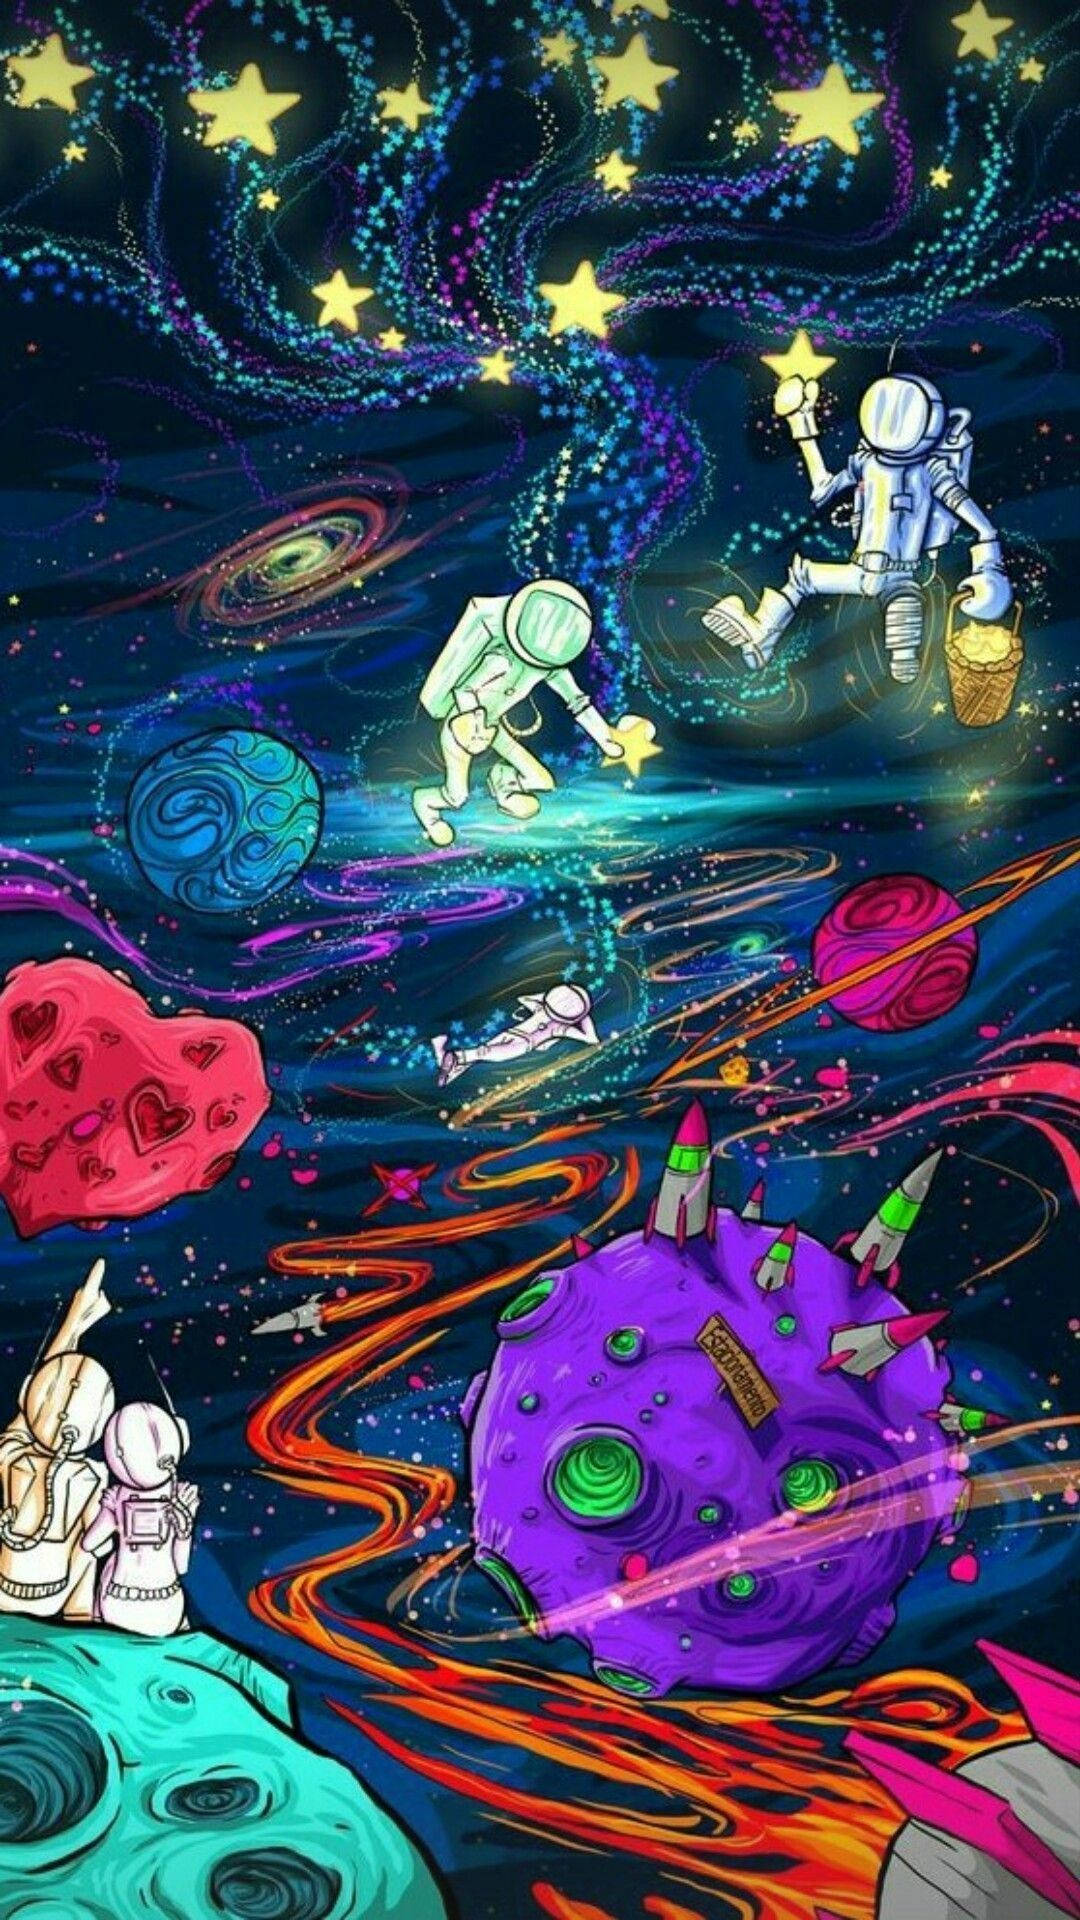 Welcome to a trippy and wacky world of cartoon fun! Wallpaper